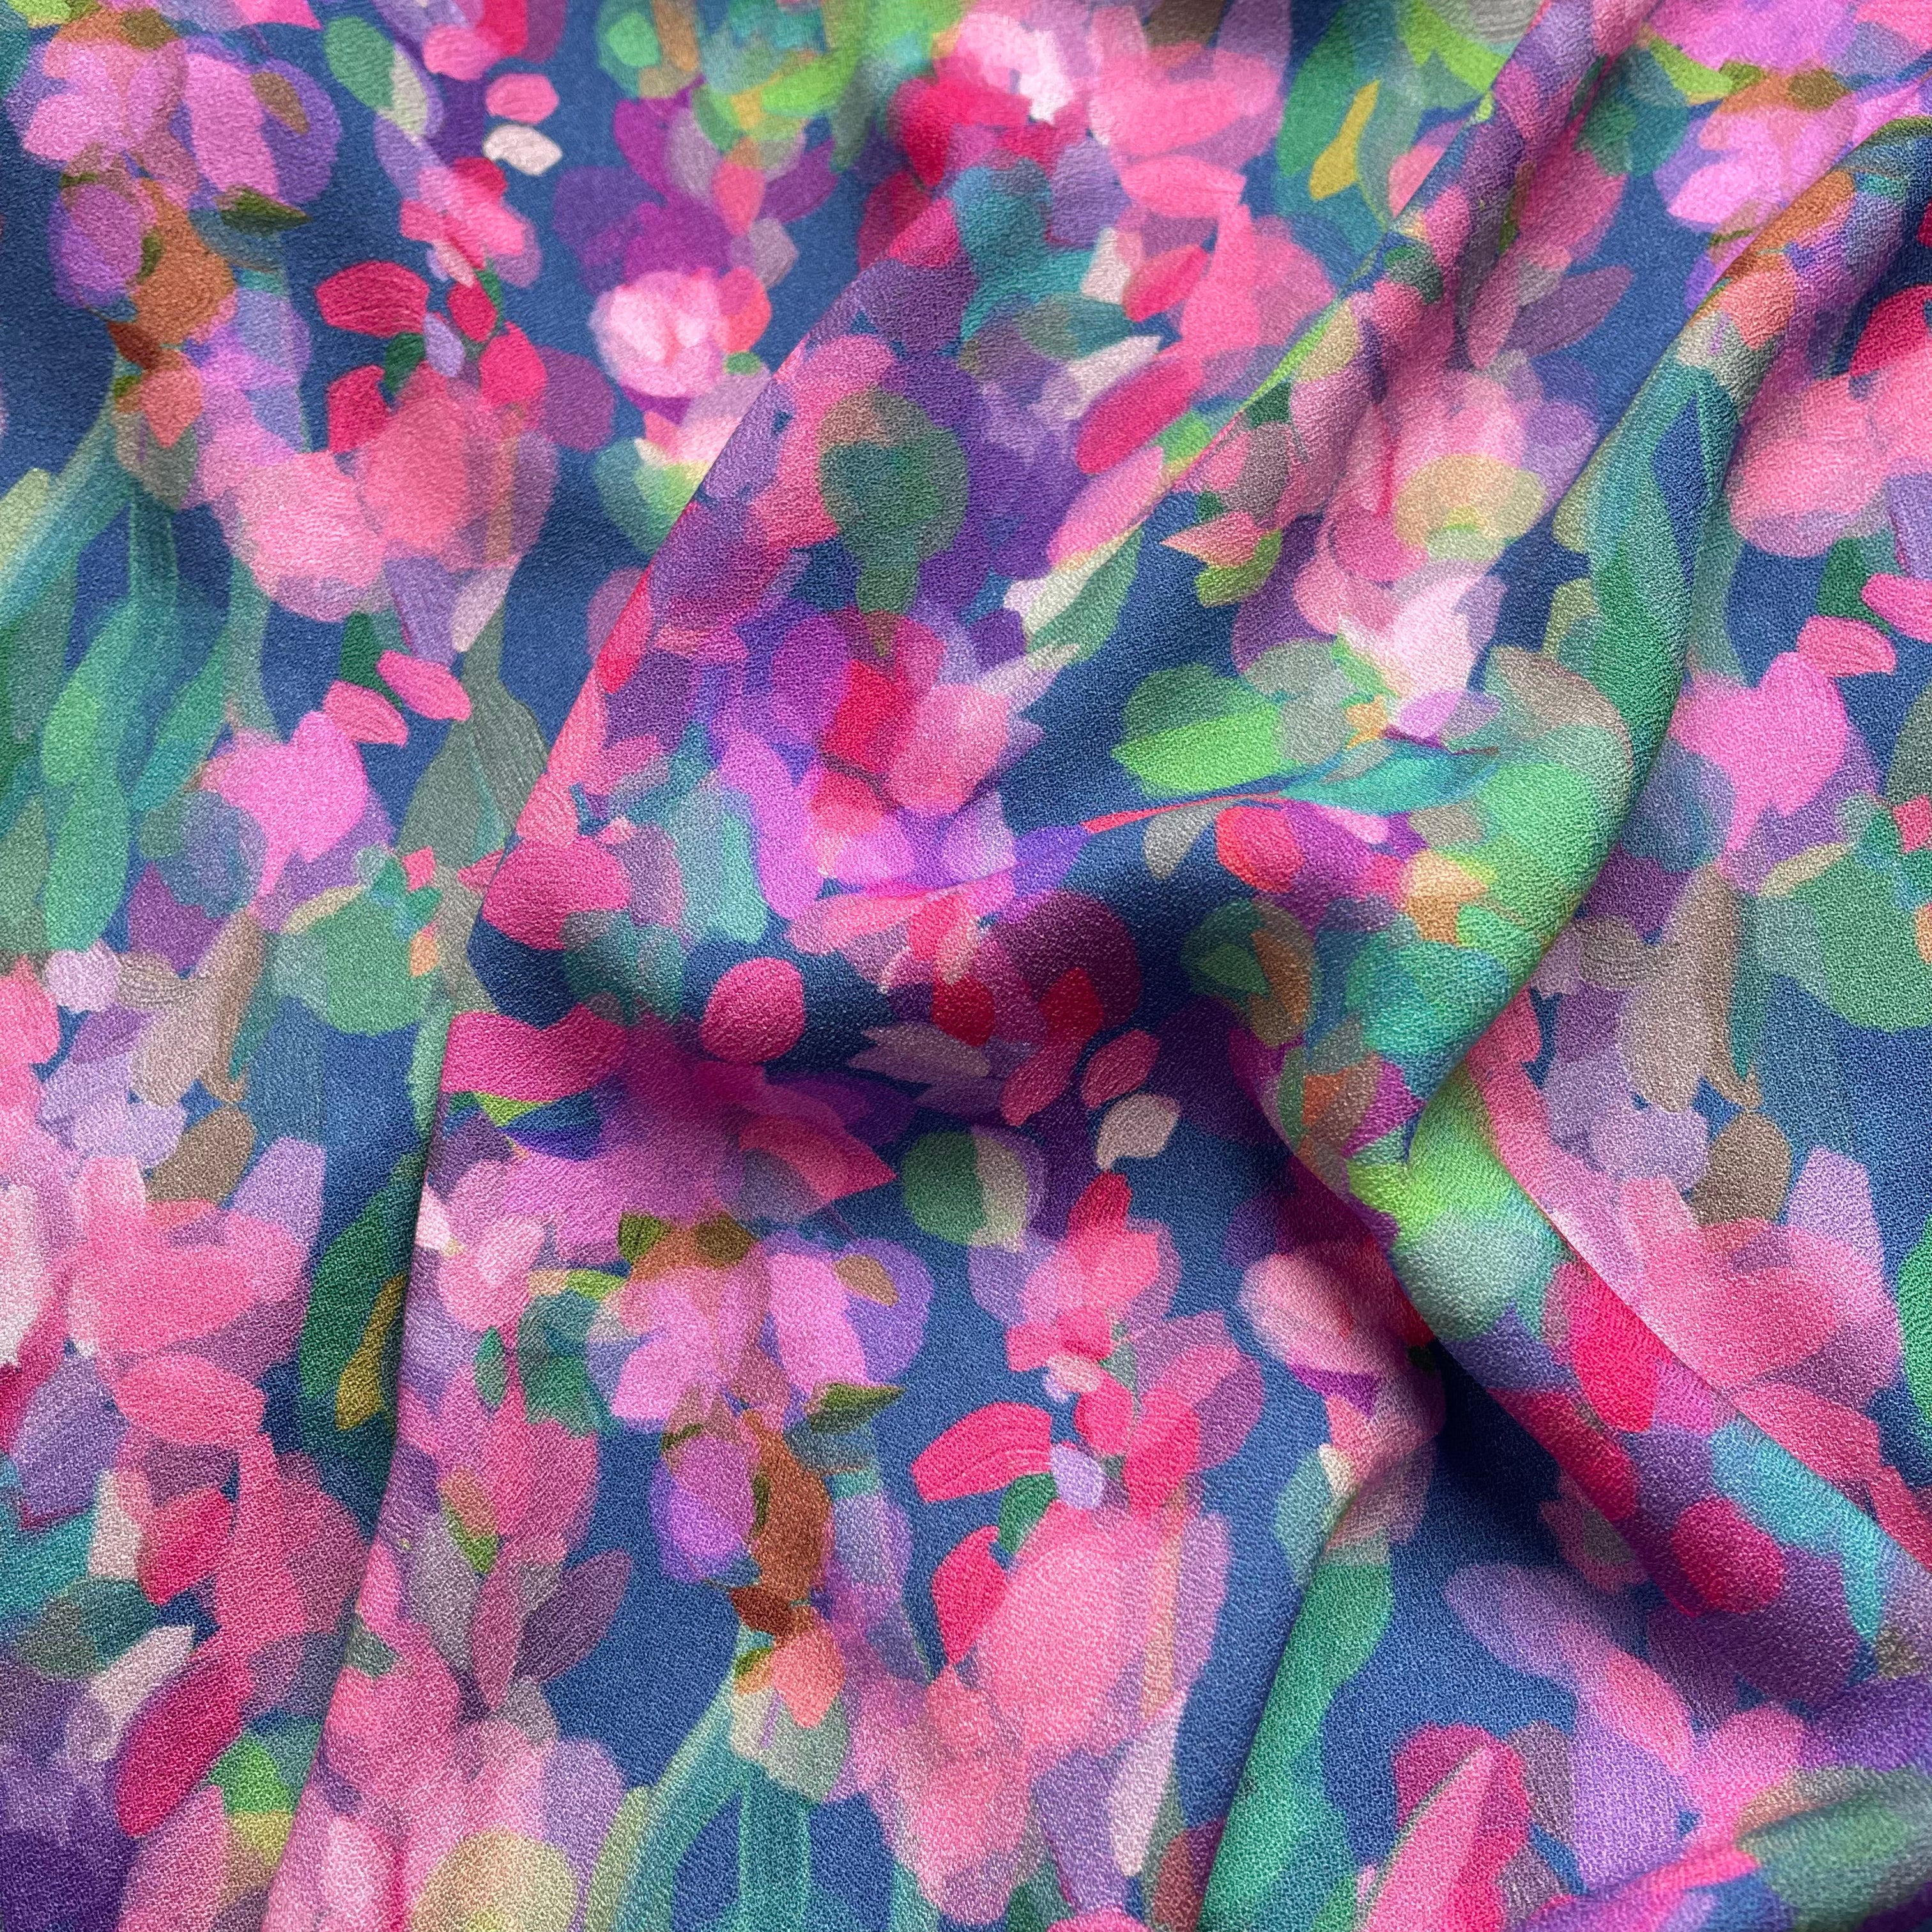 Summer Party - Lupine Petals Blue Morracain Soft Viscose Crepe (more due soon)